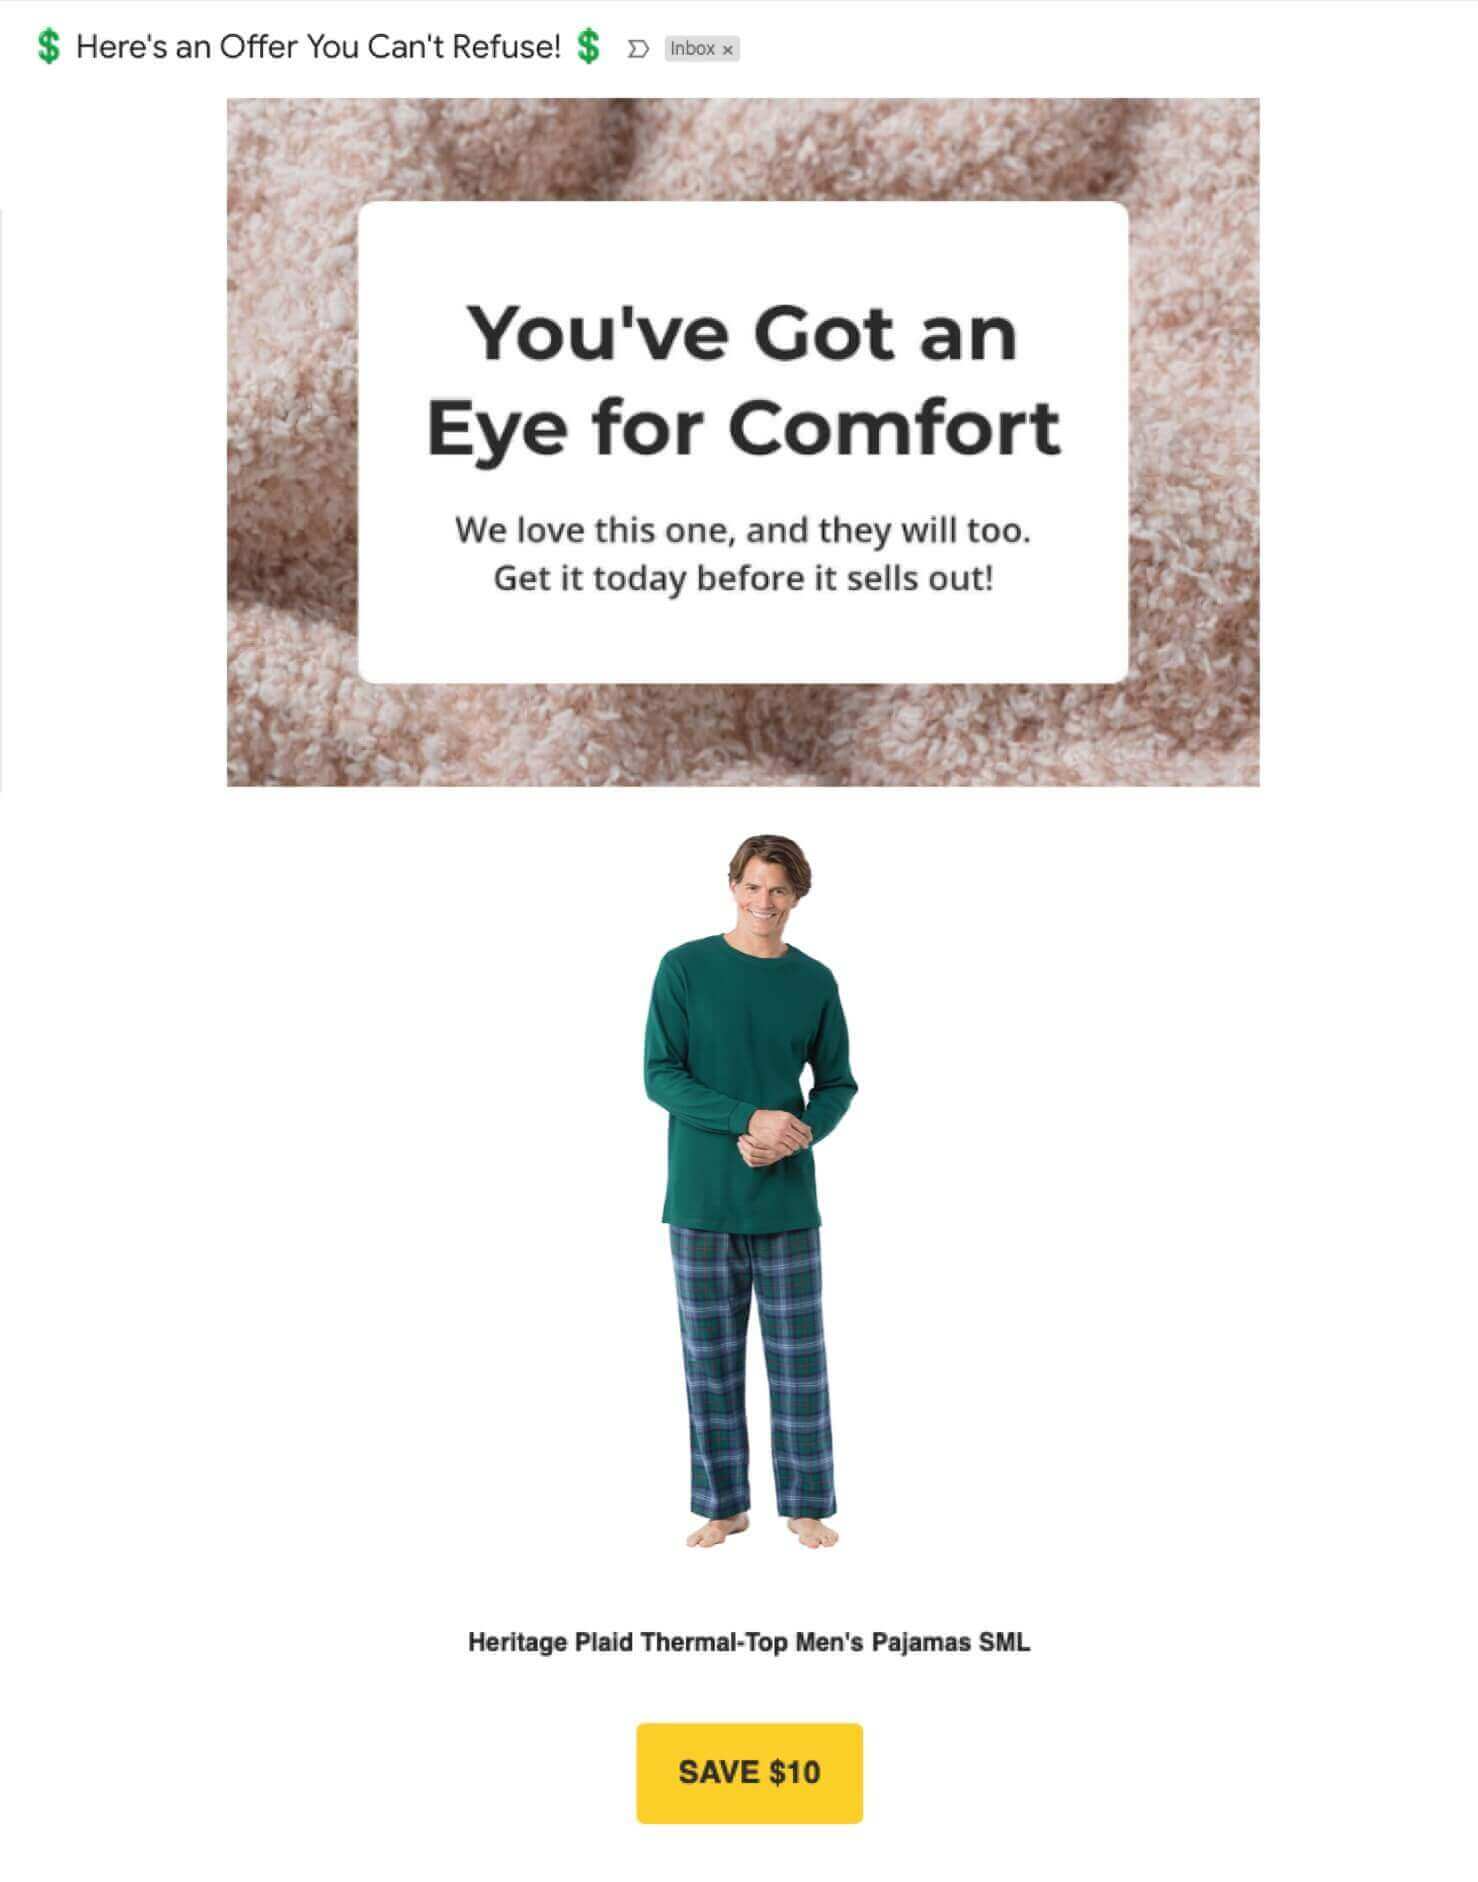 Email PajamaGran that says "You've Got an Eye for Comfort. We love this one, and they will too. Get it today before it sells out!" Then, there's a photo and link to a product, and a CTA button that says "Save $10"